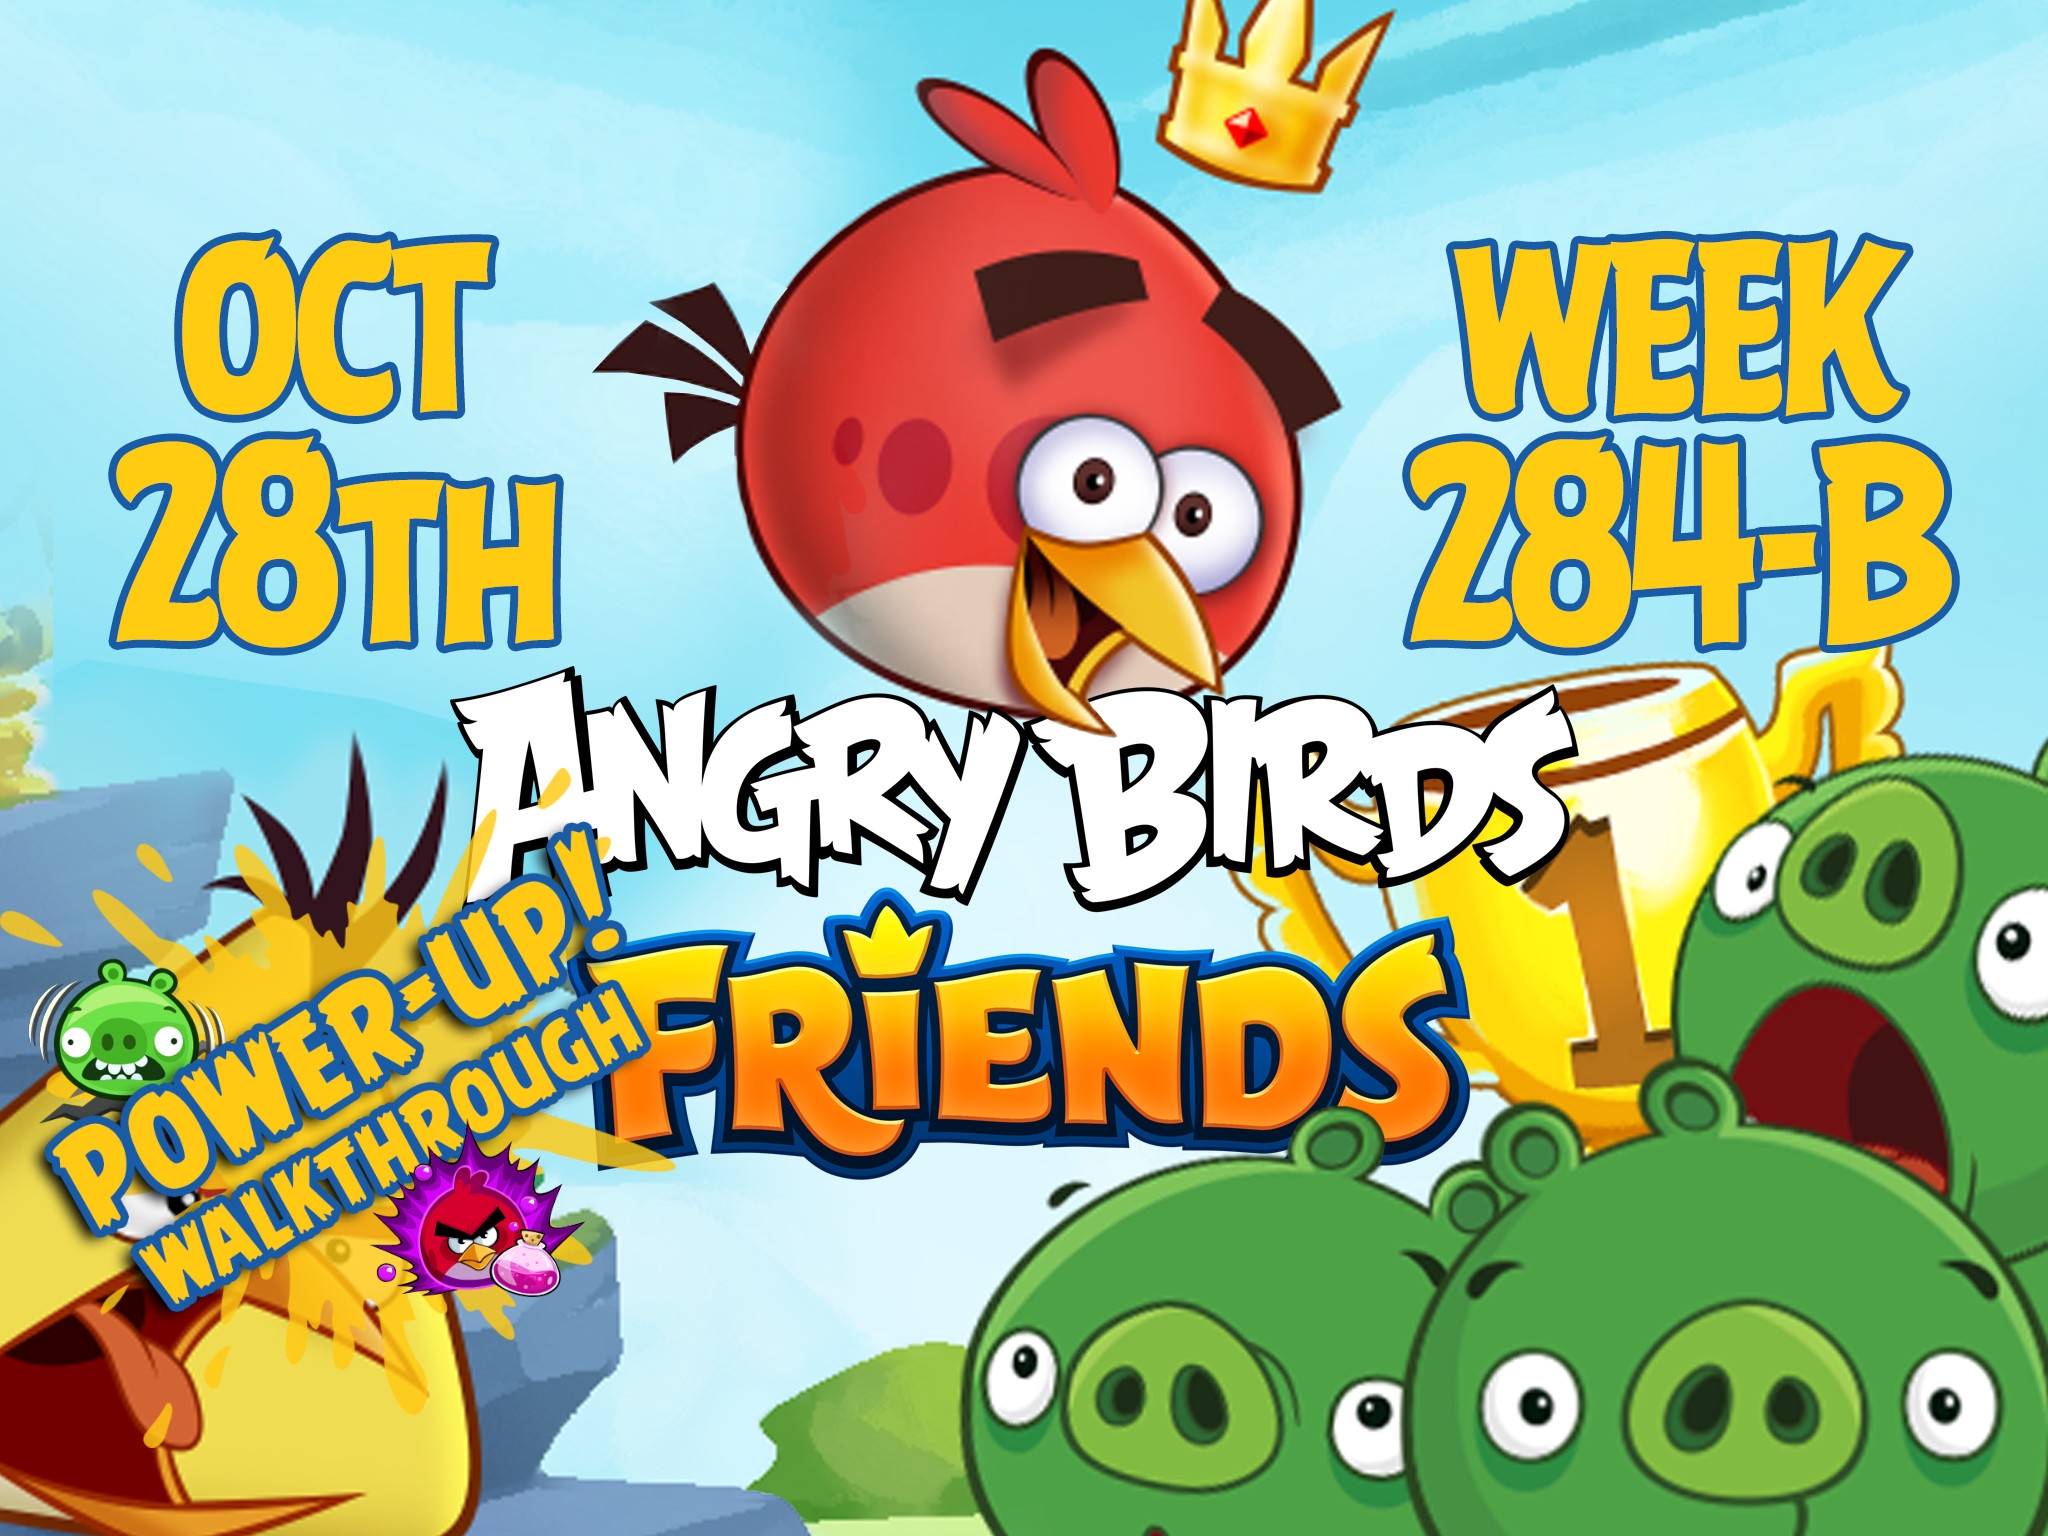 Angry Birds Friends Tournament Week 284-B Feature Image PU